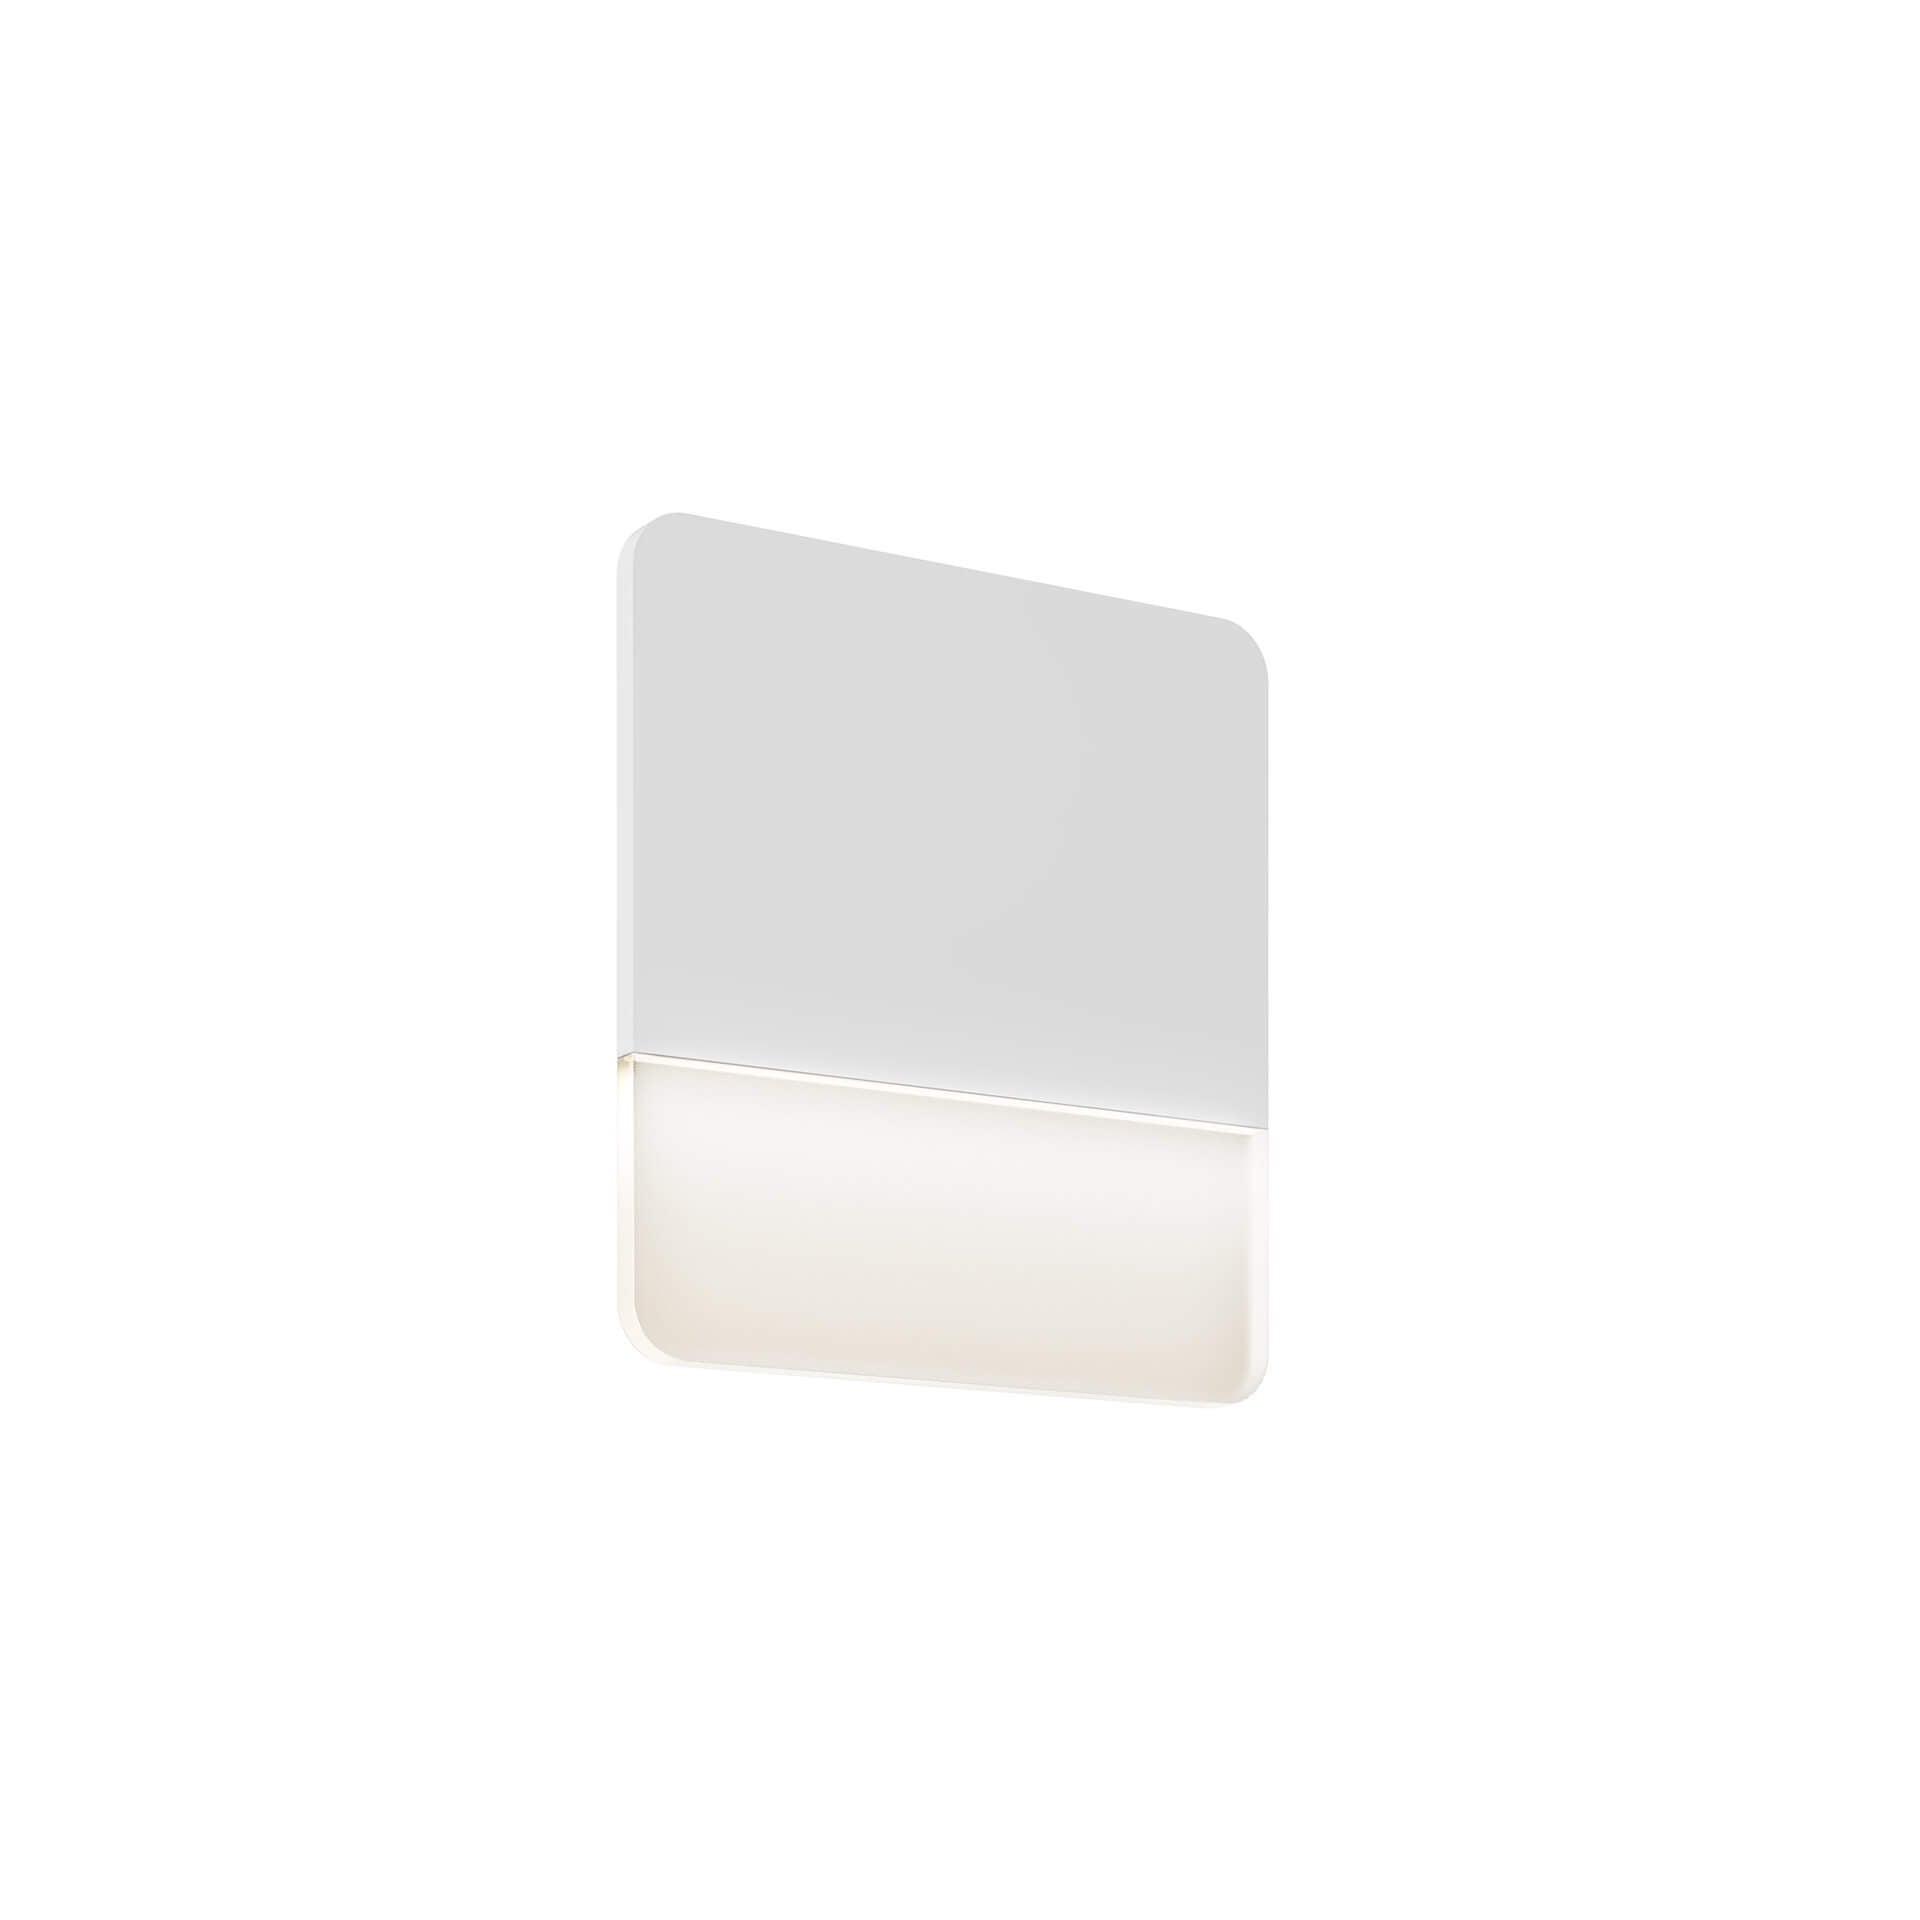 DALS Lighting FORMS 10 Inch Square Ultra Slim Wall Sconce